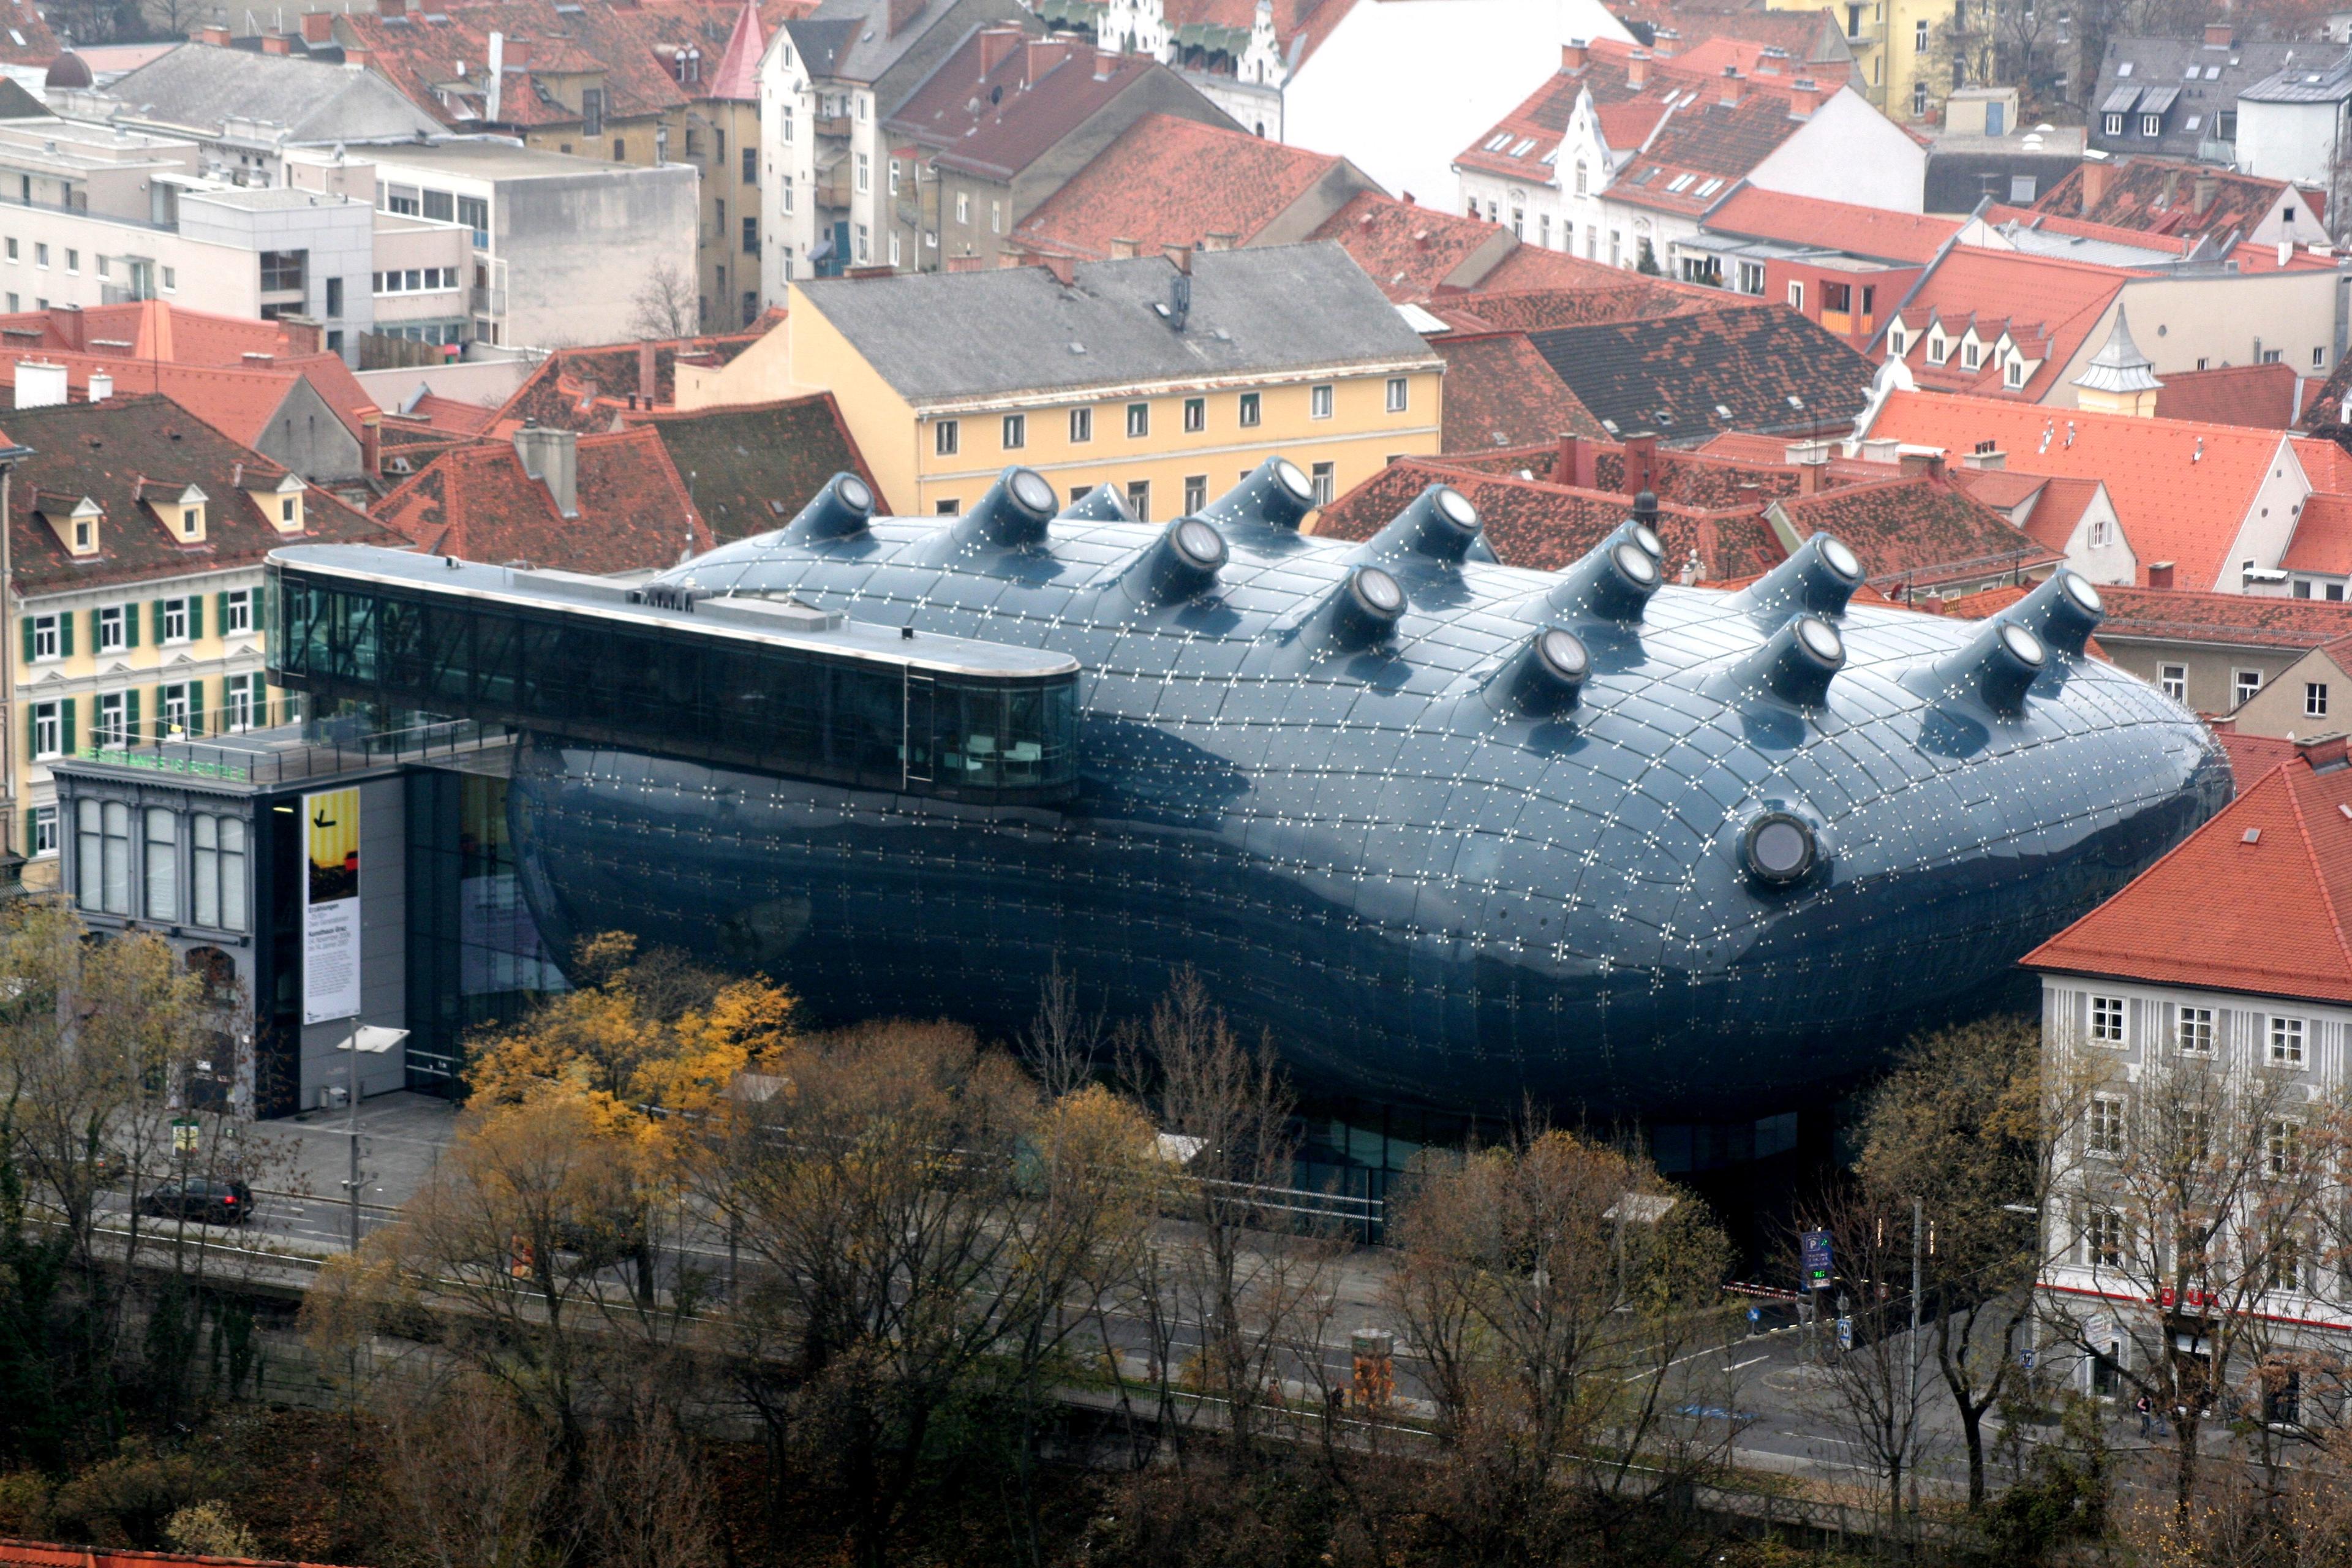 Cover image of this place Kunsthaus